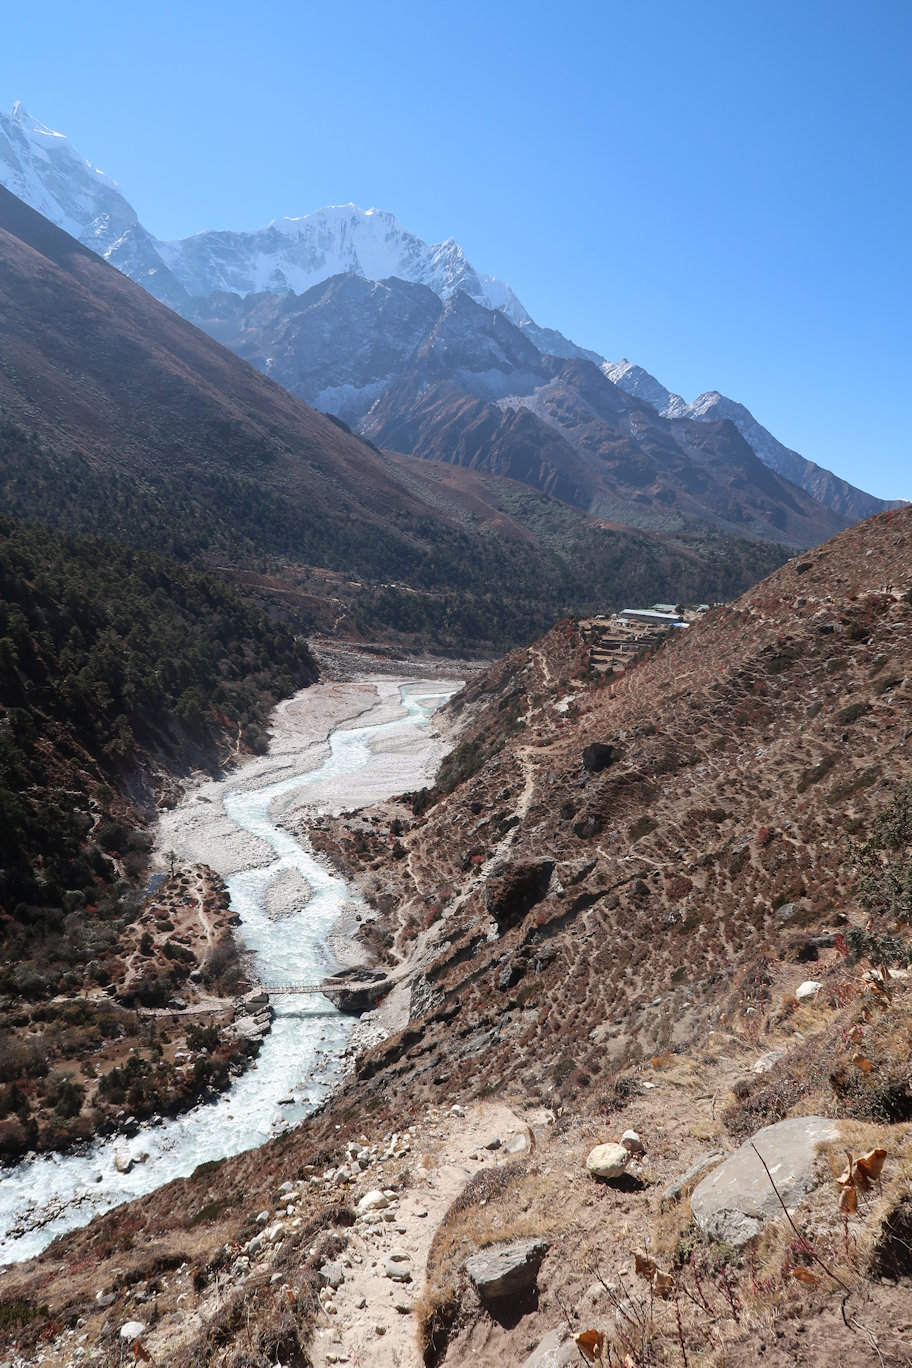 Following the valley back to Namche